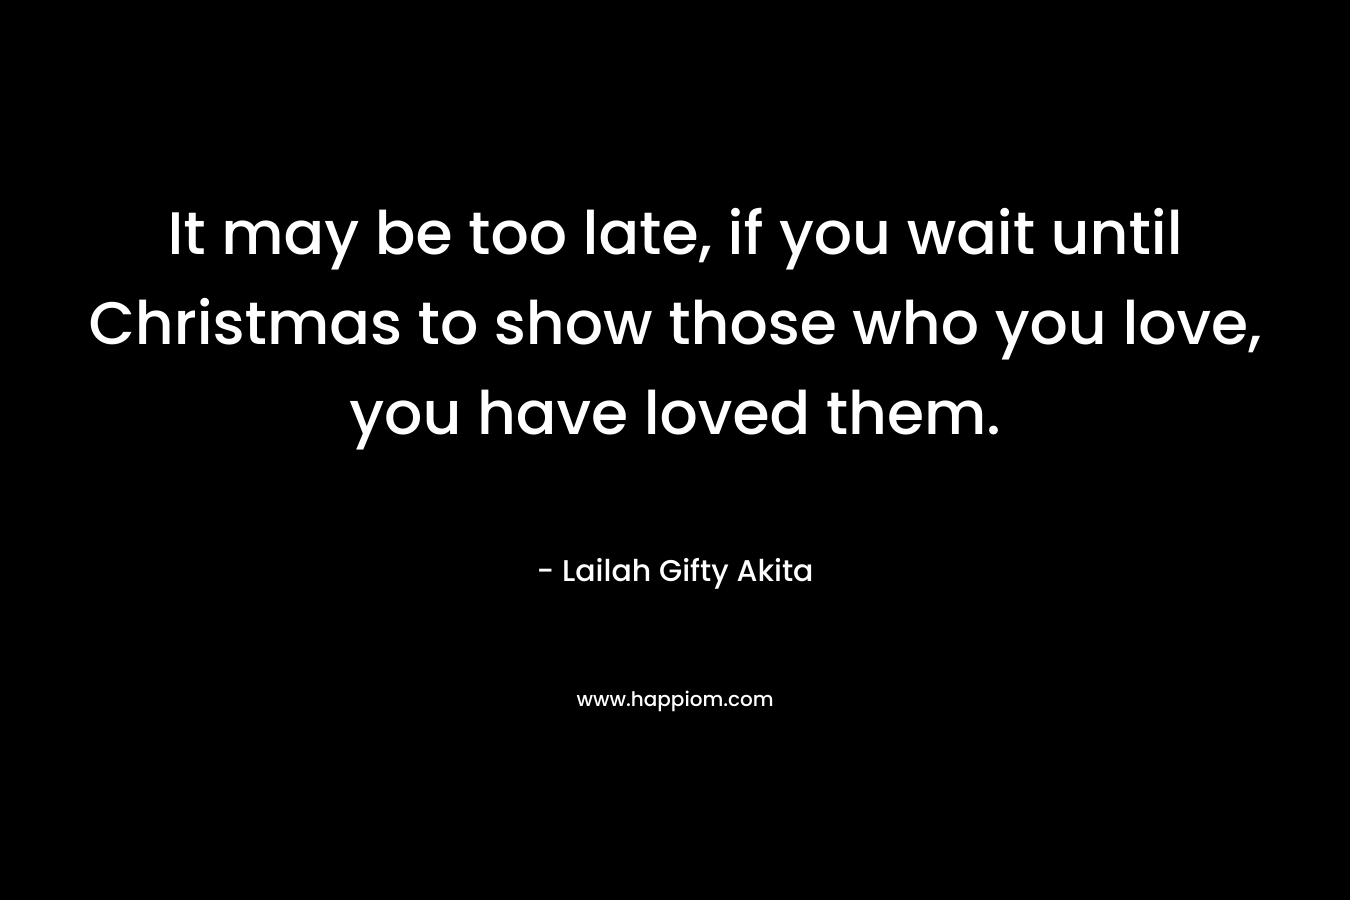 It may be too late, if you wait until Christmas to show those who you love, you have loved them.